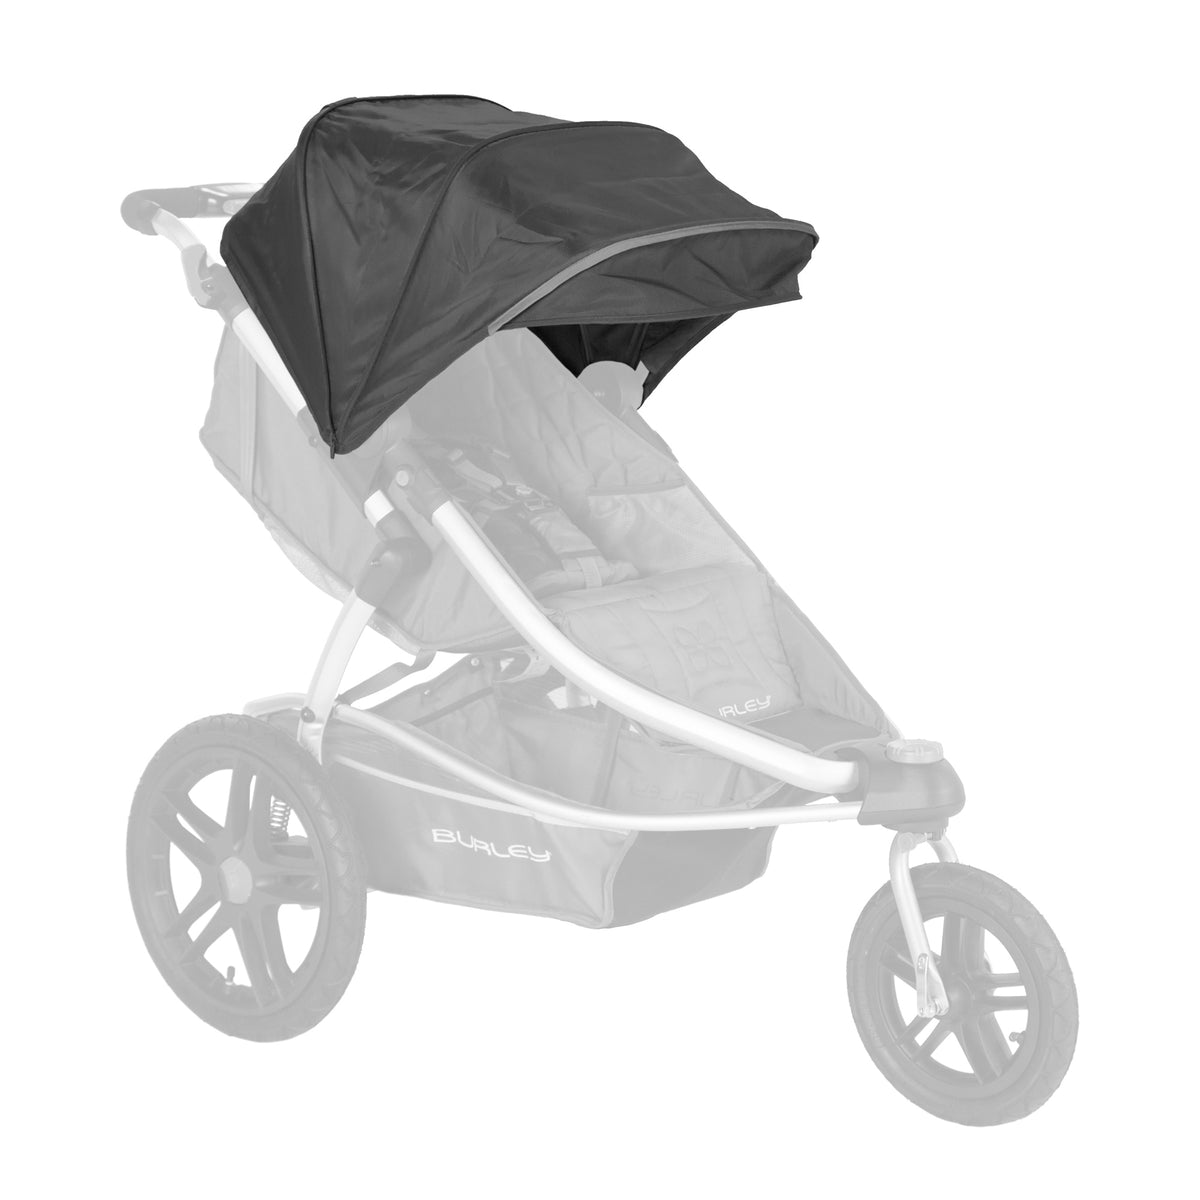 Solstice Replacement Canopy (Black)